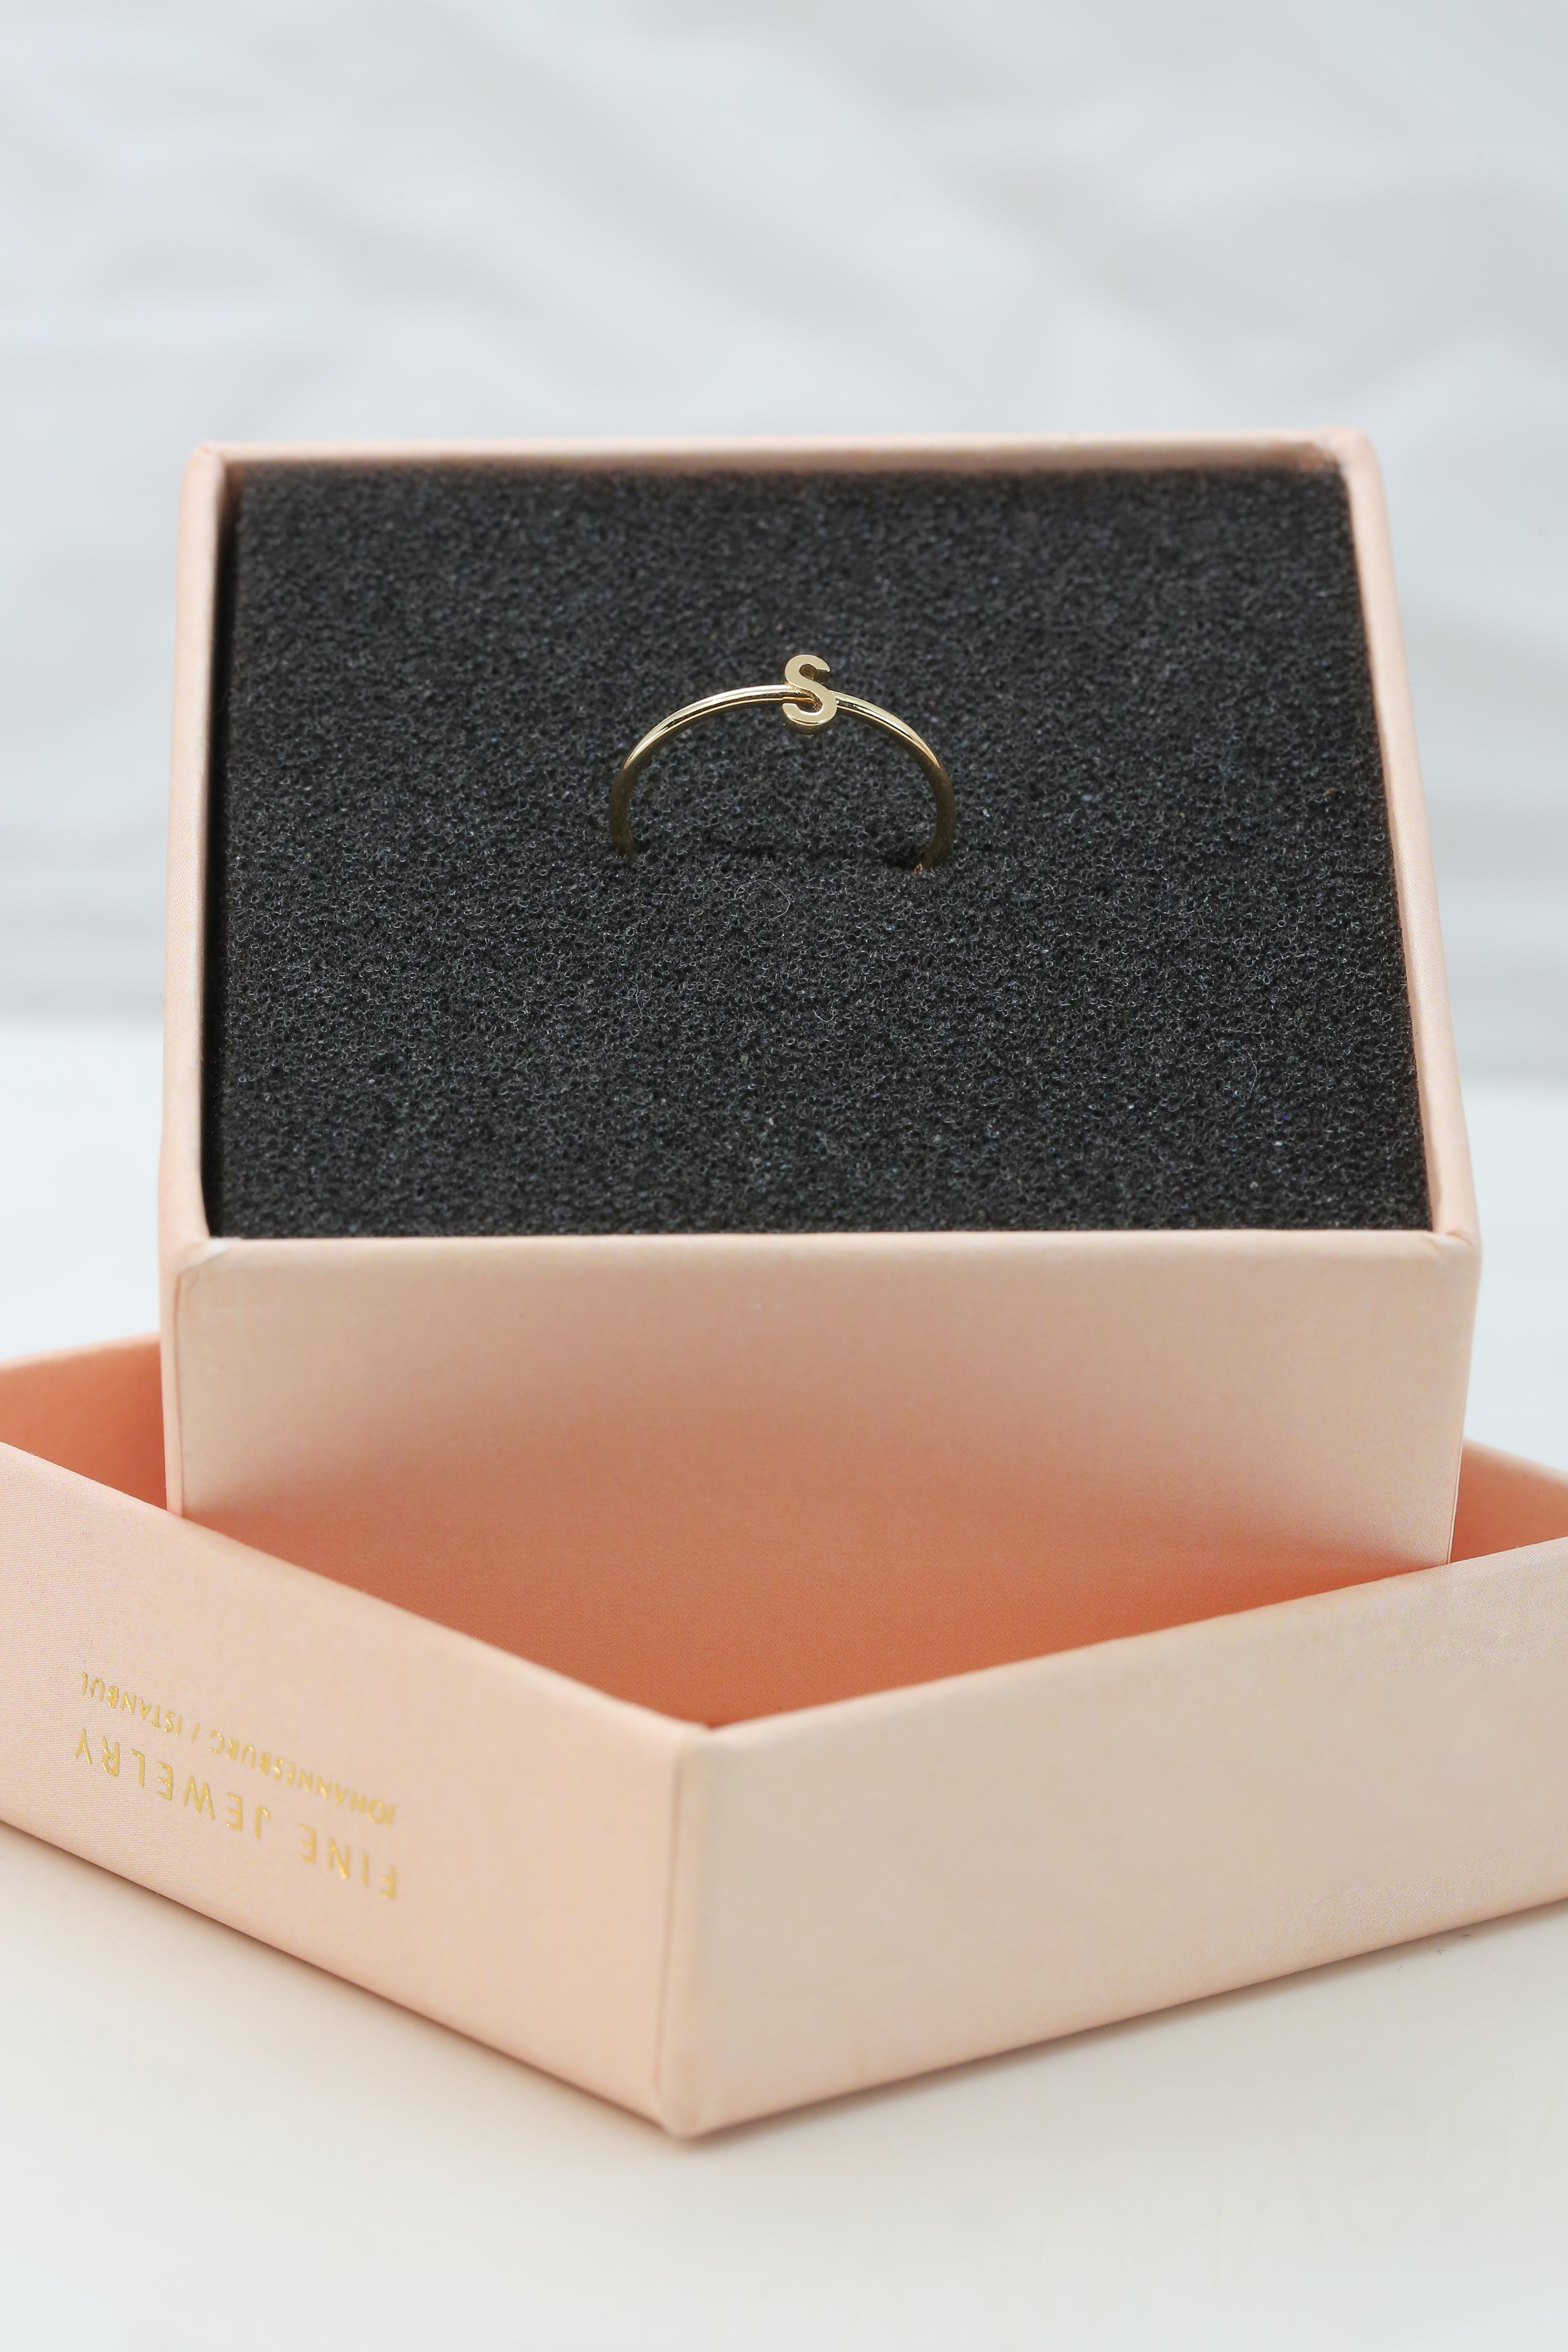 For Sale:  14K Gold Initial S Letter Ring, Personalized Initial Letter Ring 6